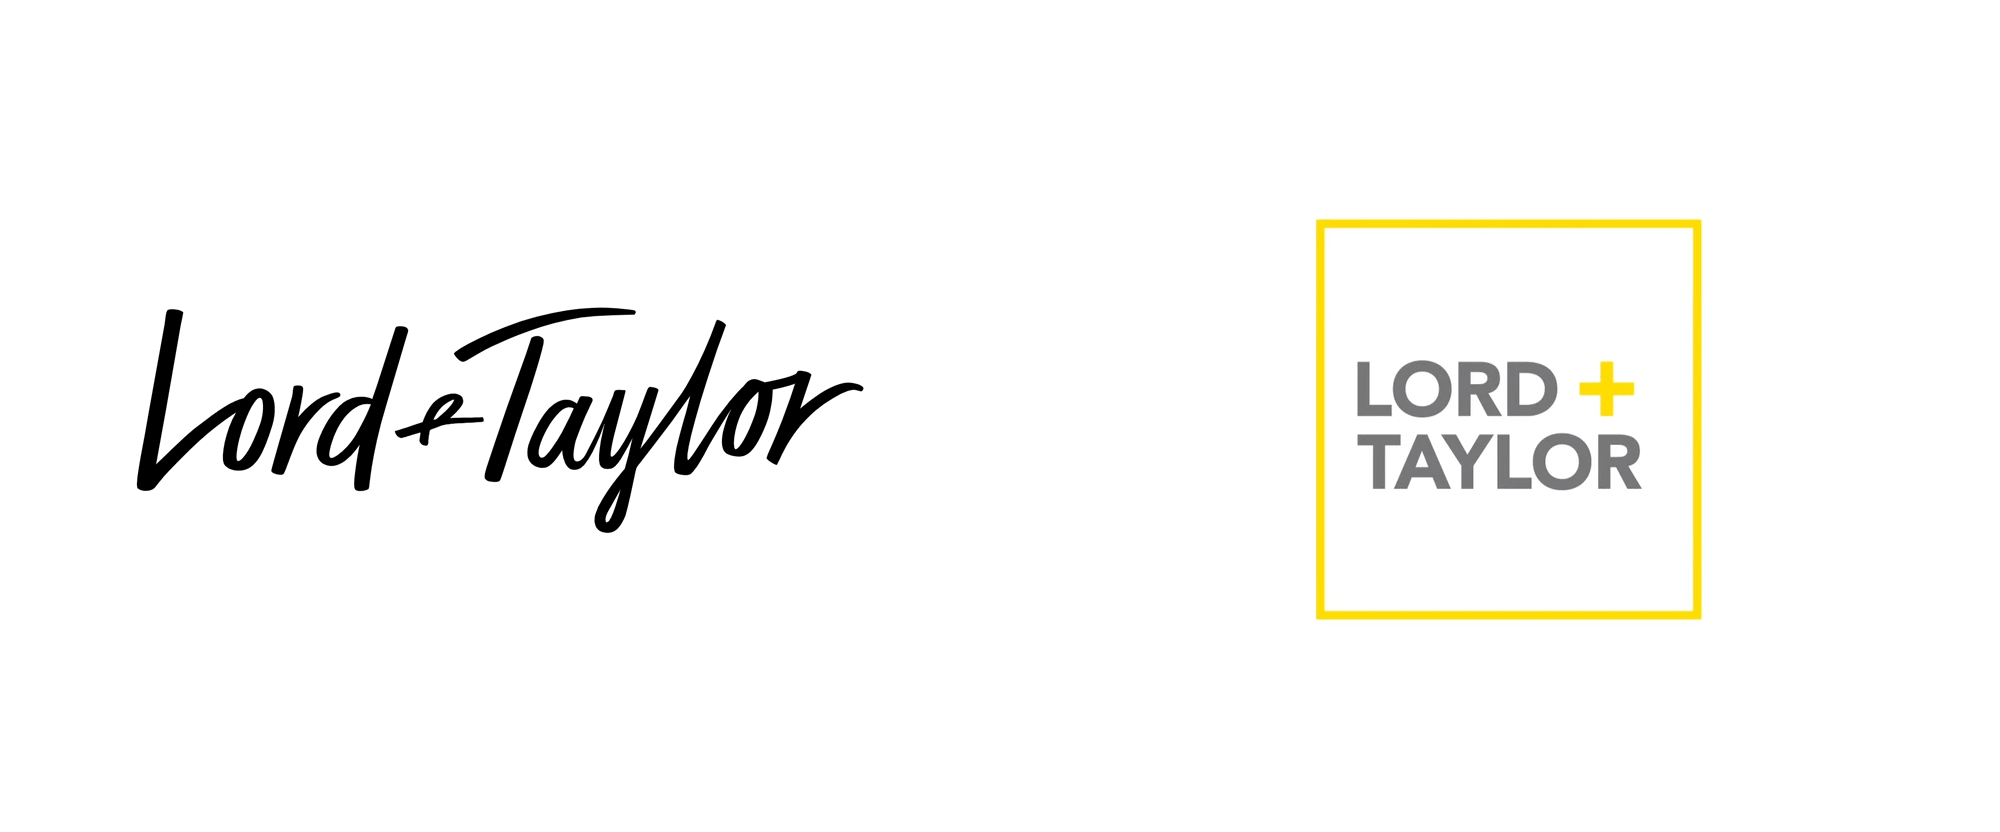 https://www.underconsideration.com/brandnew/archives/lord_taylor_2019_logo_before_after.png